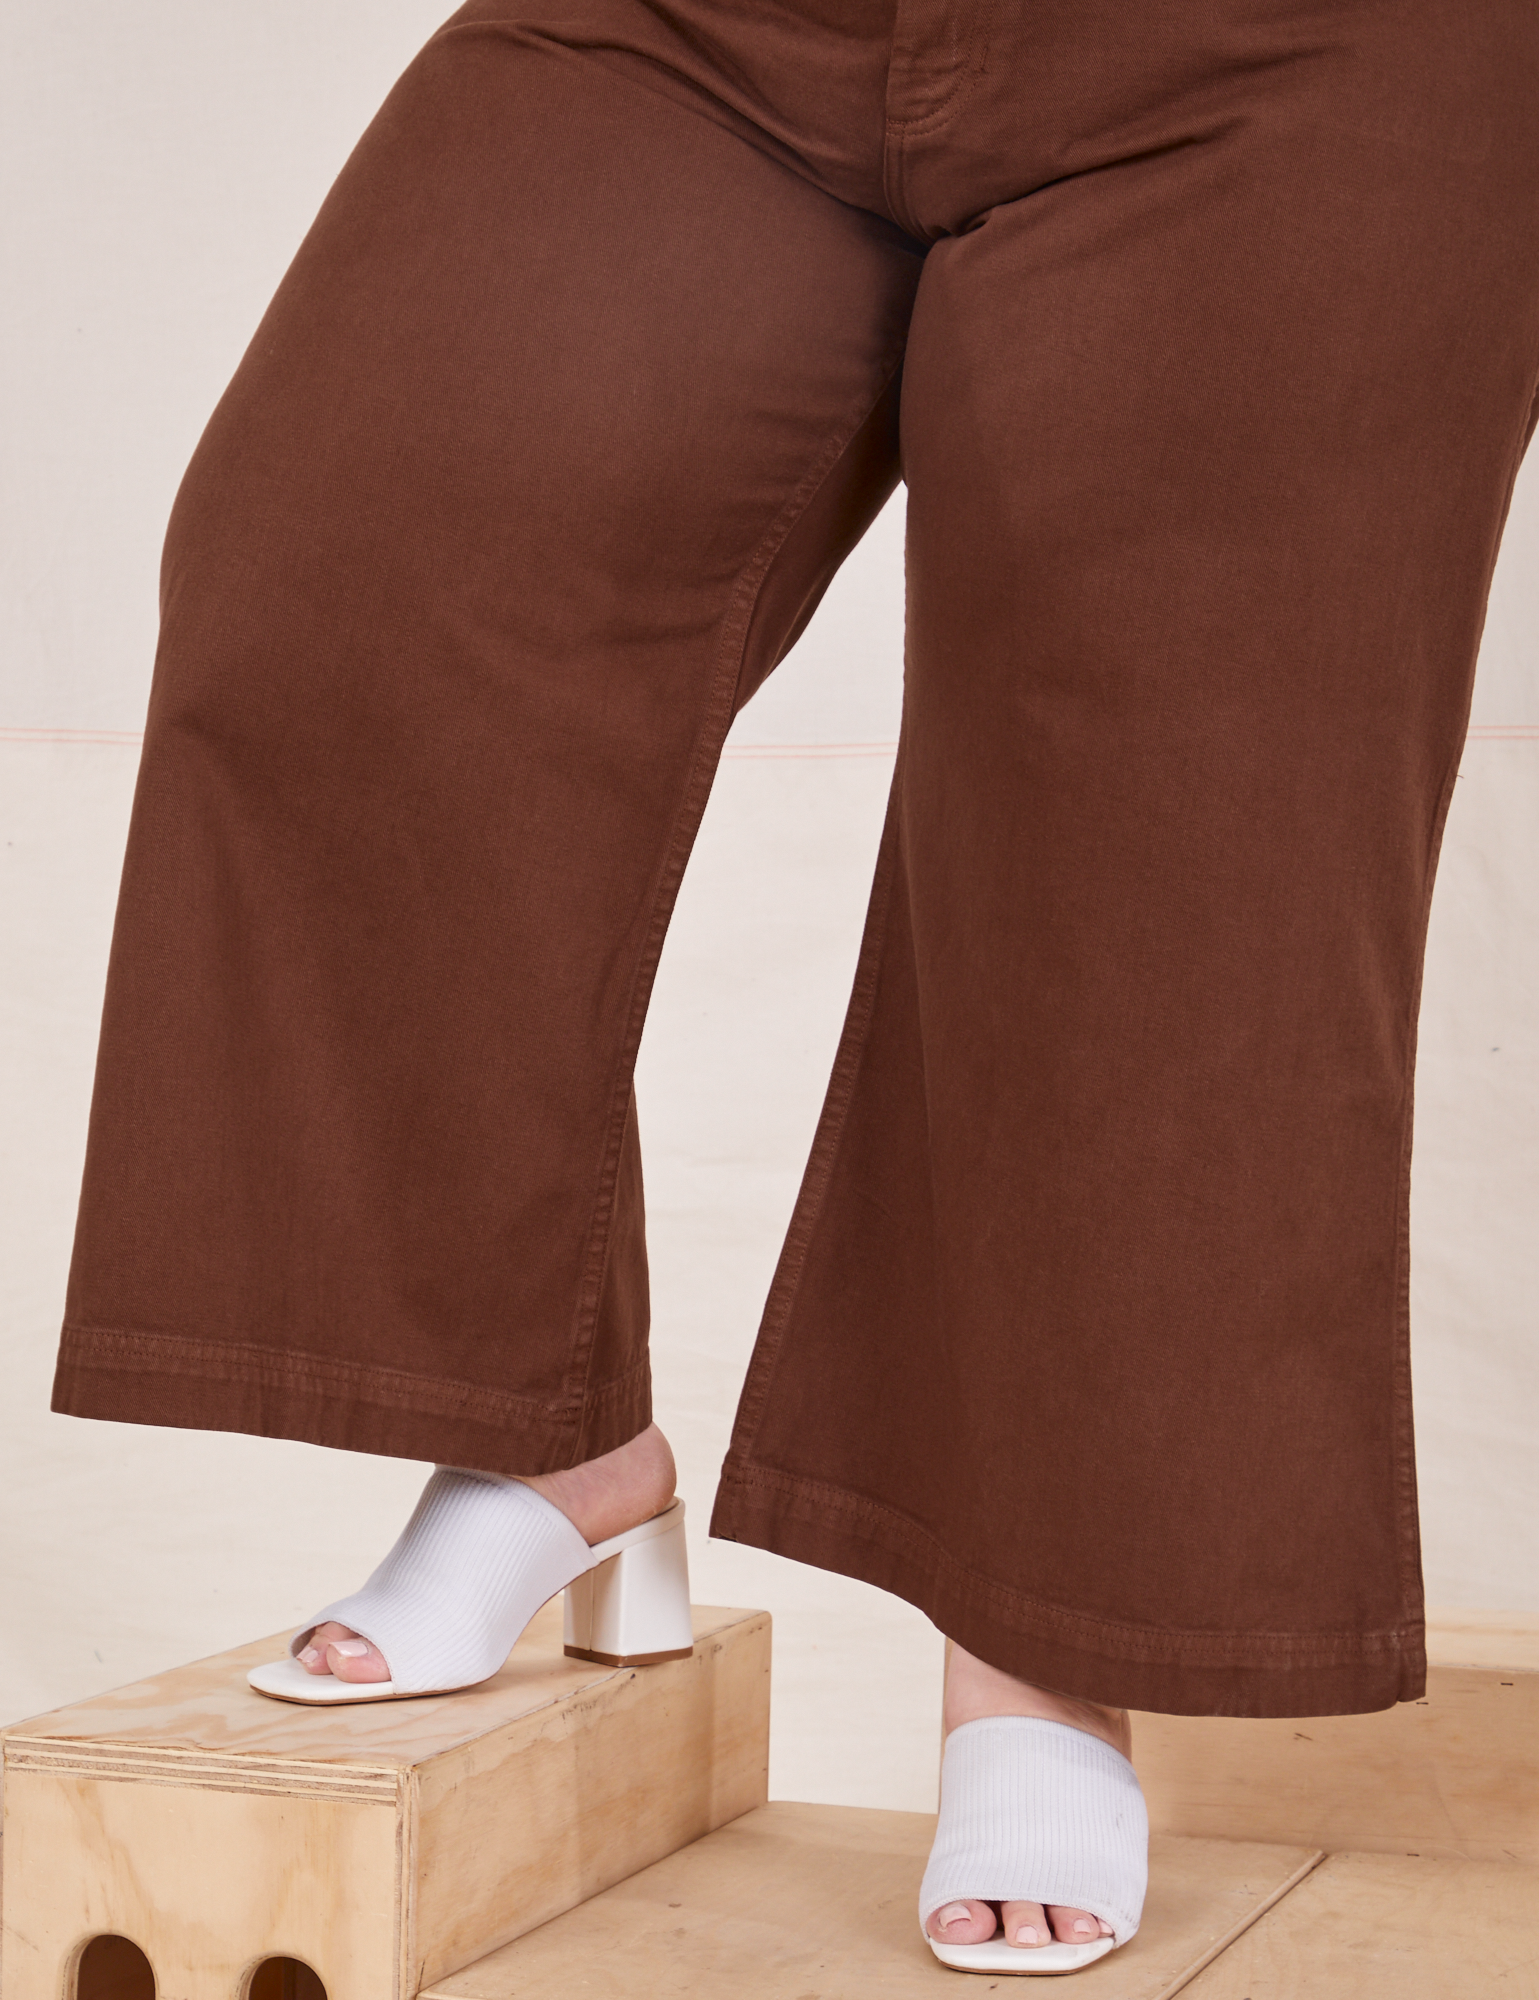 Petite Bell Bottoms in Fudgesicle Brown pant leg close up on Ashley